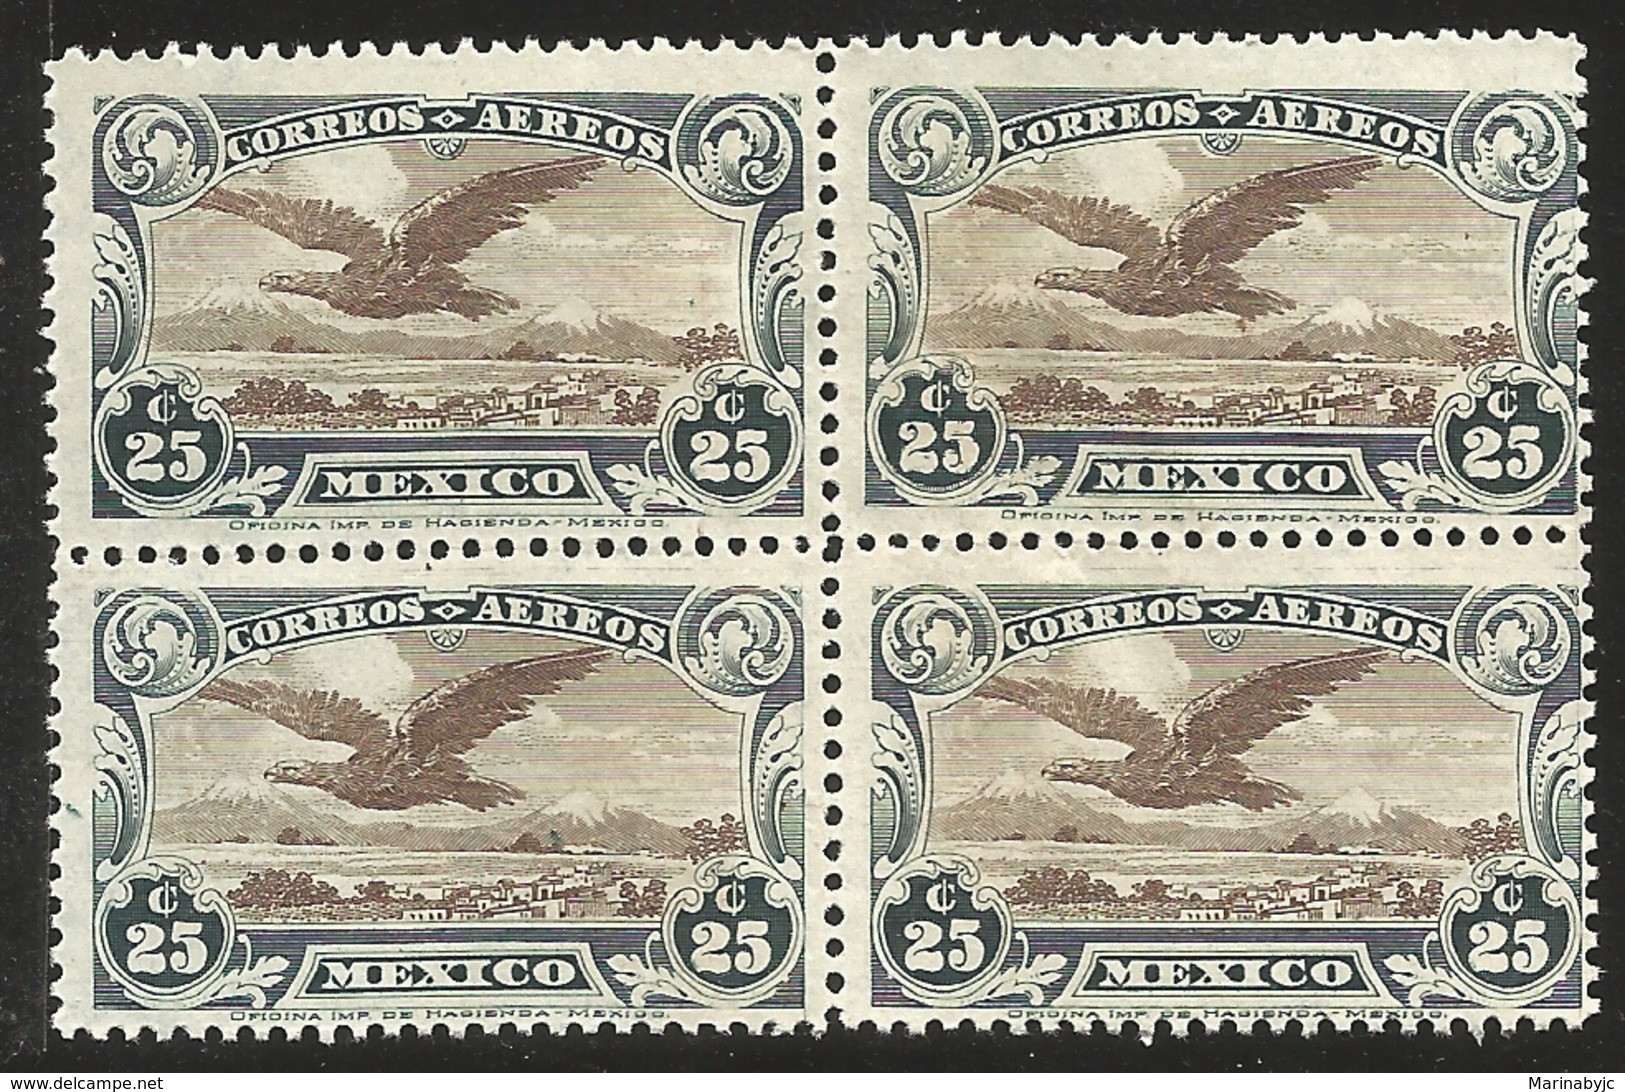 RJ) 1928 MEXICO, BLOCK OF 4, EAGLE FLYING OVER MOUNTAINS, SCOTT C4, MNH - Mexique